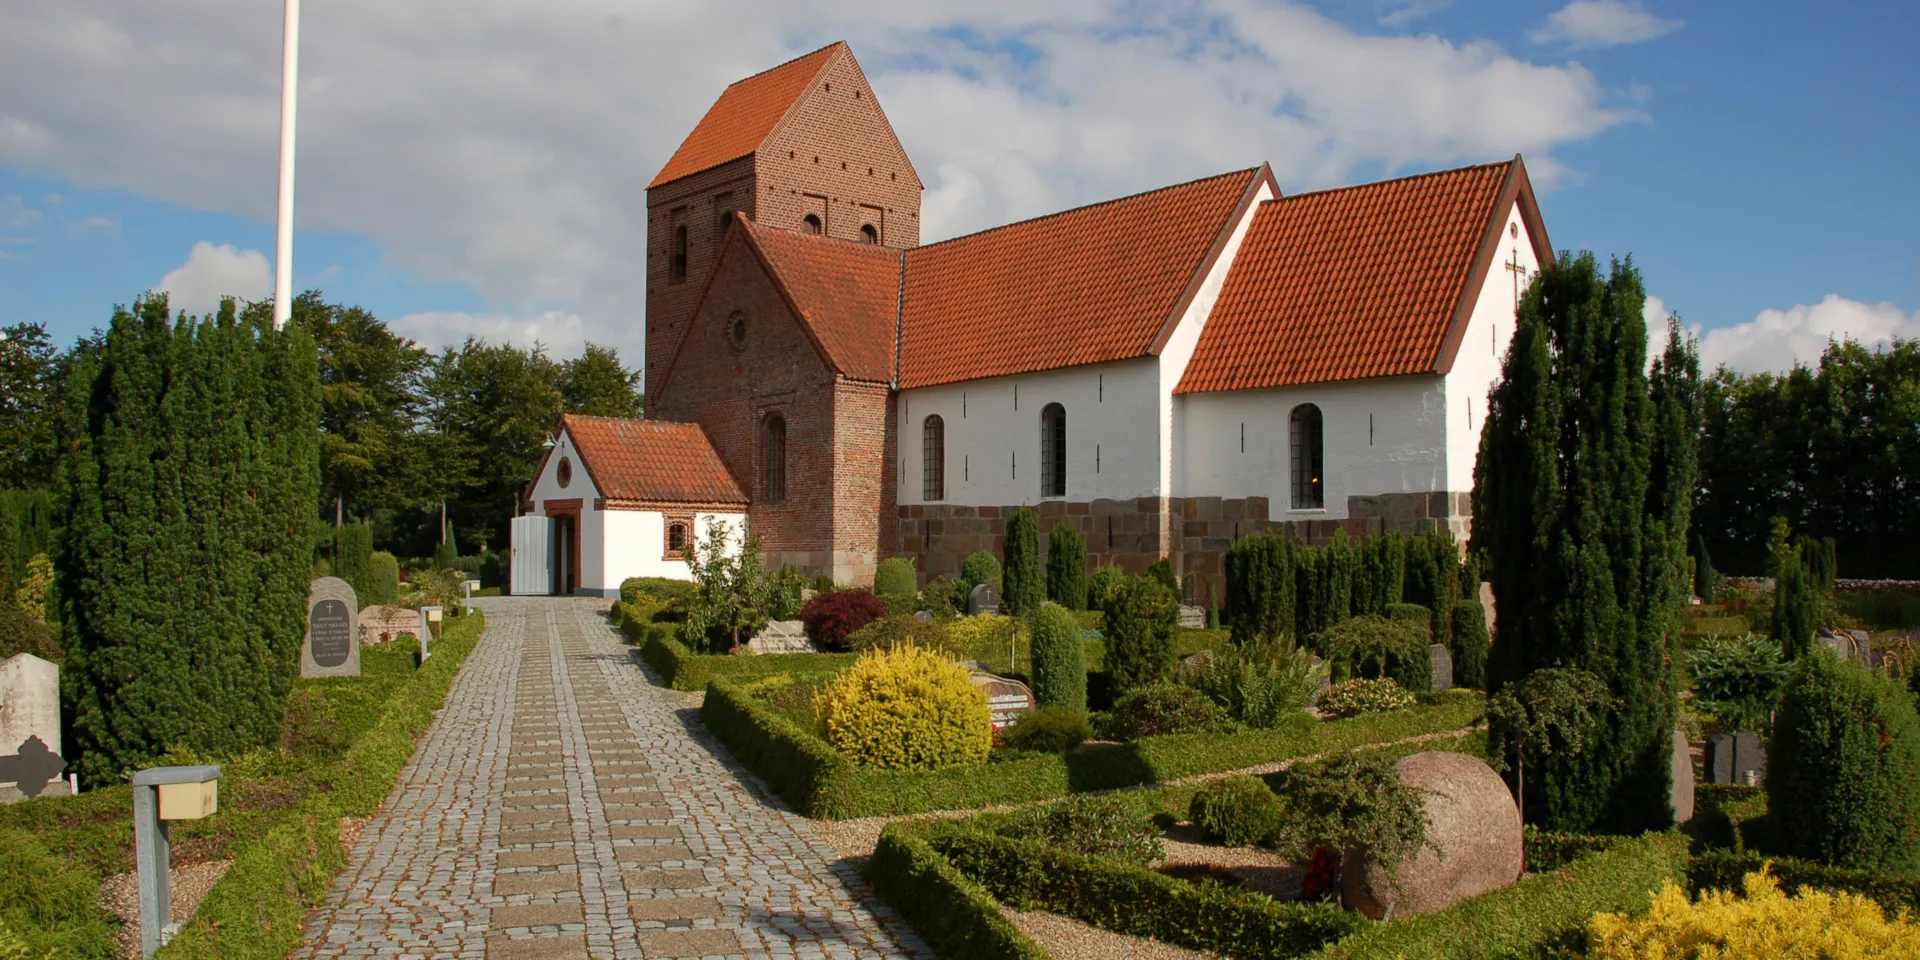 Vorbasse church from the outside